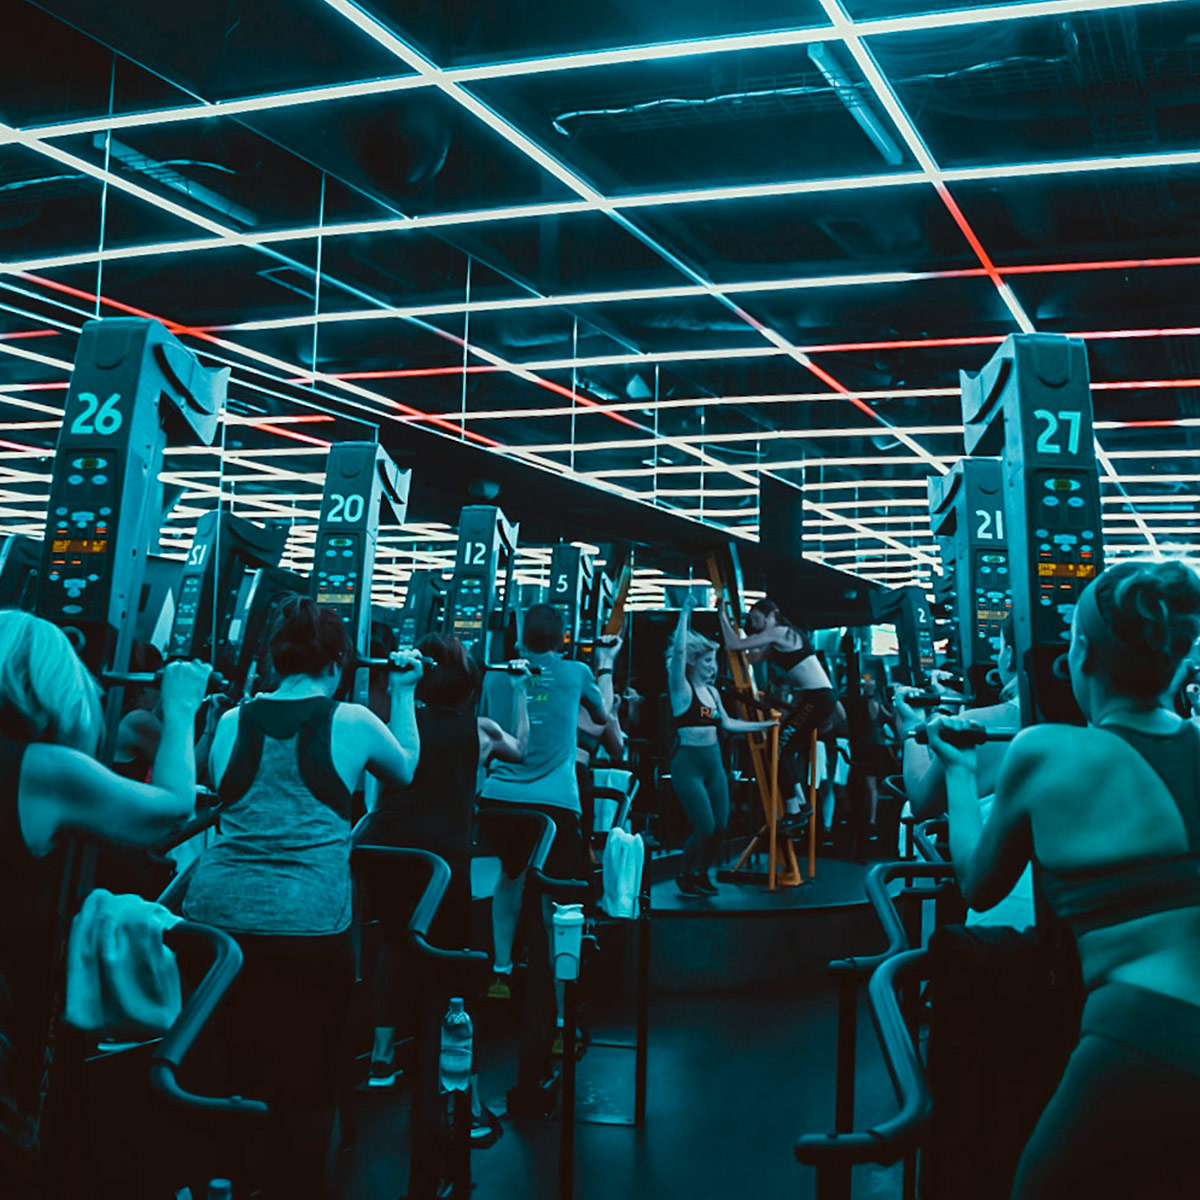 RISE NATION on Instagram: Time to get down to business. Renowned celeb  fitness trainer @risemovement opened Rise Nation's first location in 2014  and created a full-body workout pulling from his expertise in